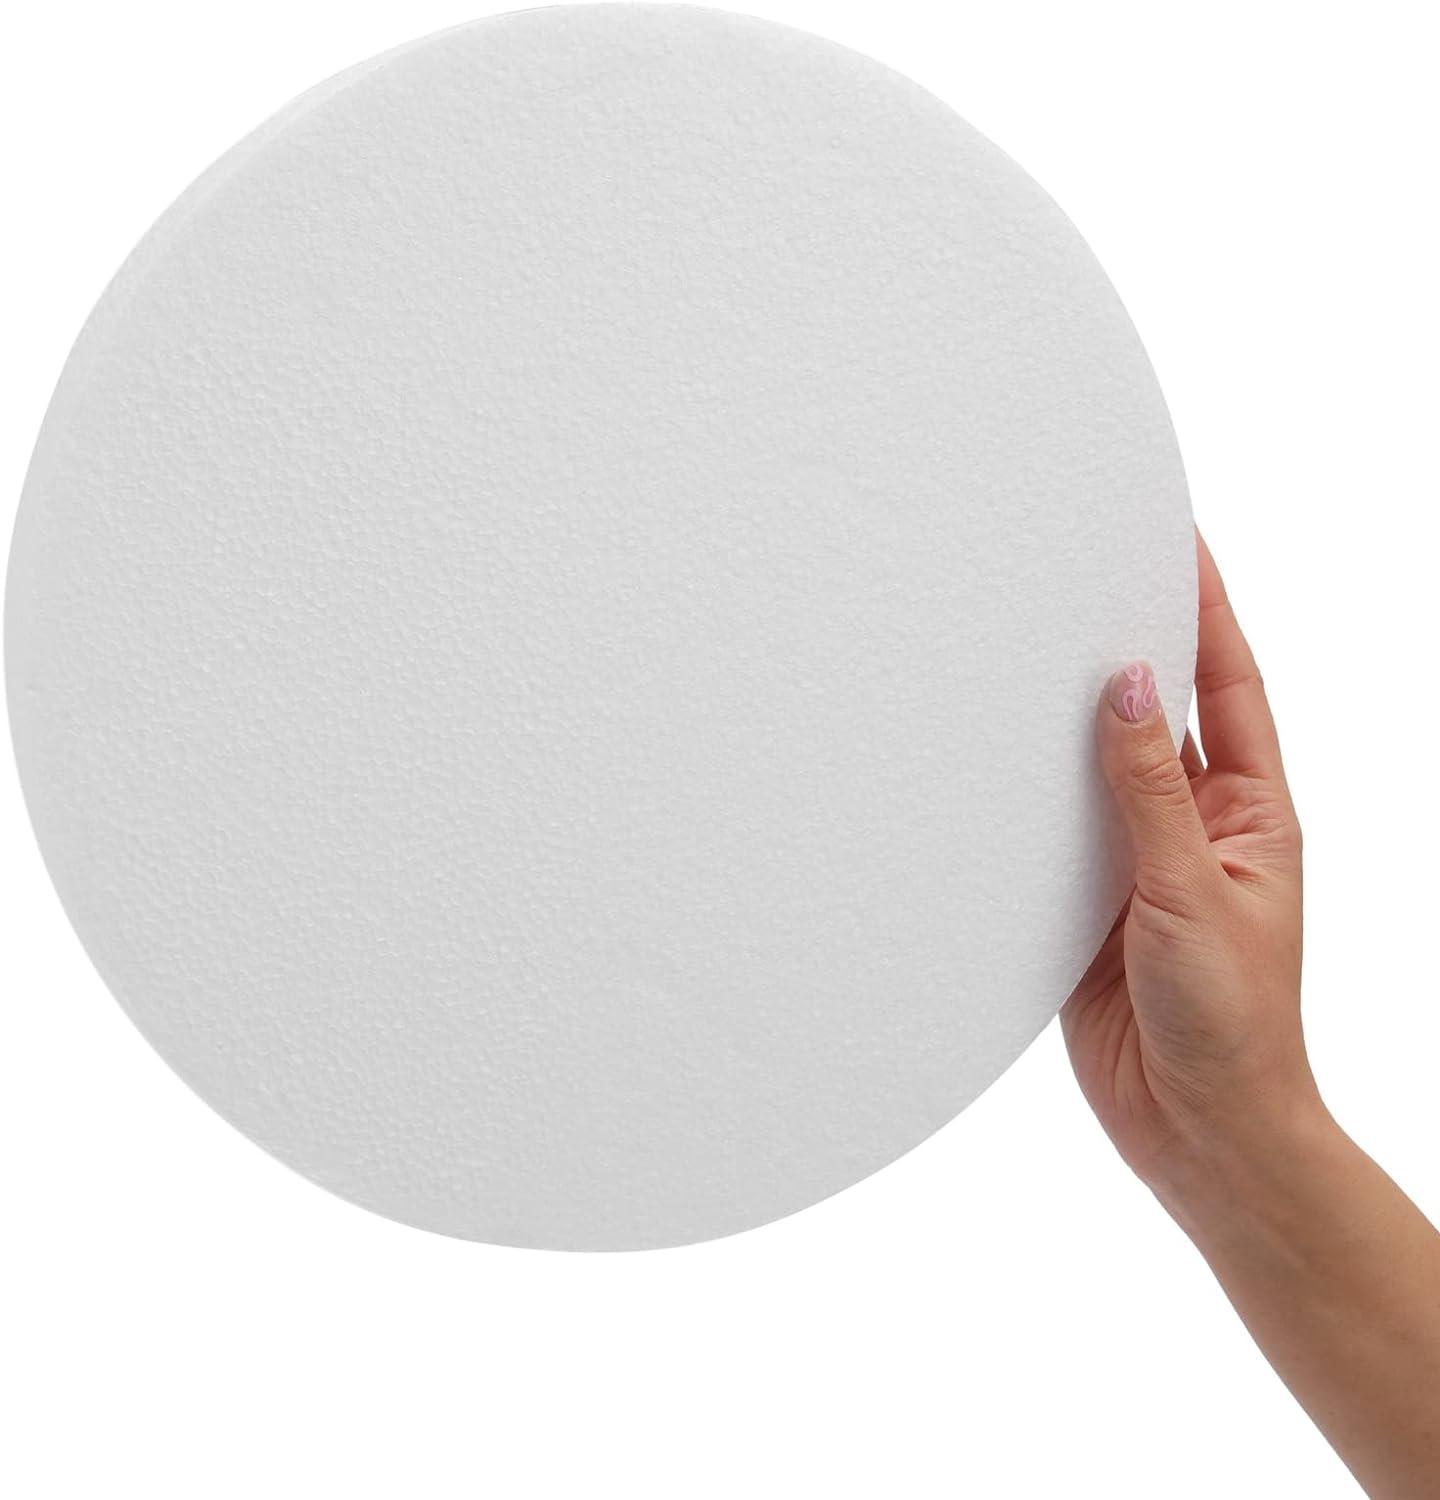 24 Pack Foam Circles for Crafts, 3 Inch Round Polystyrene Discs